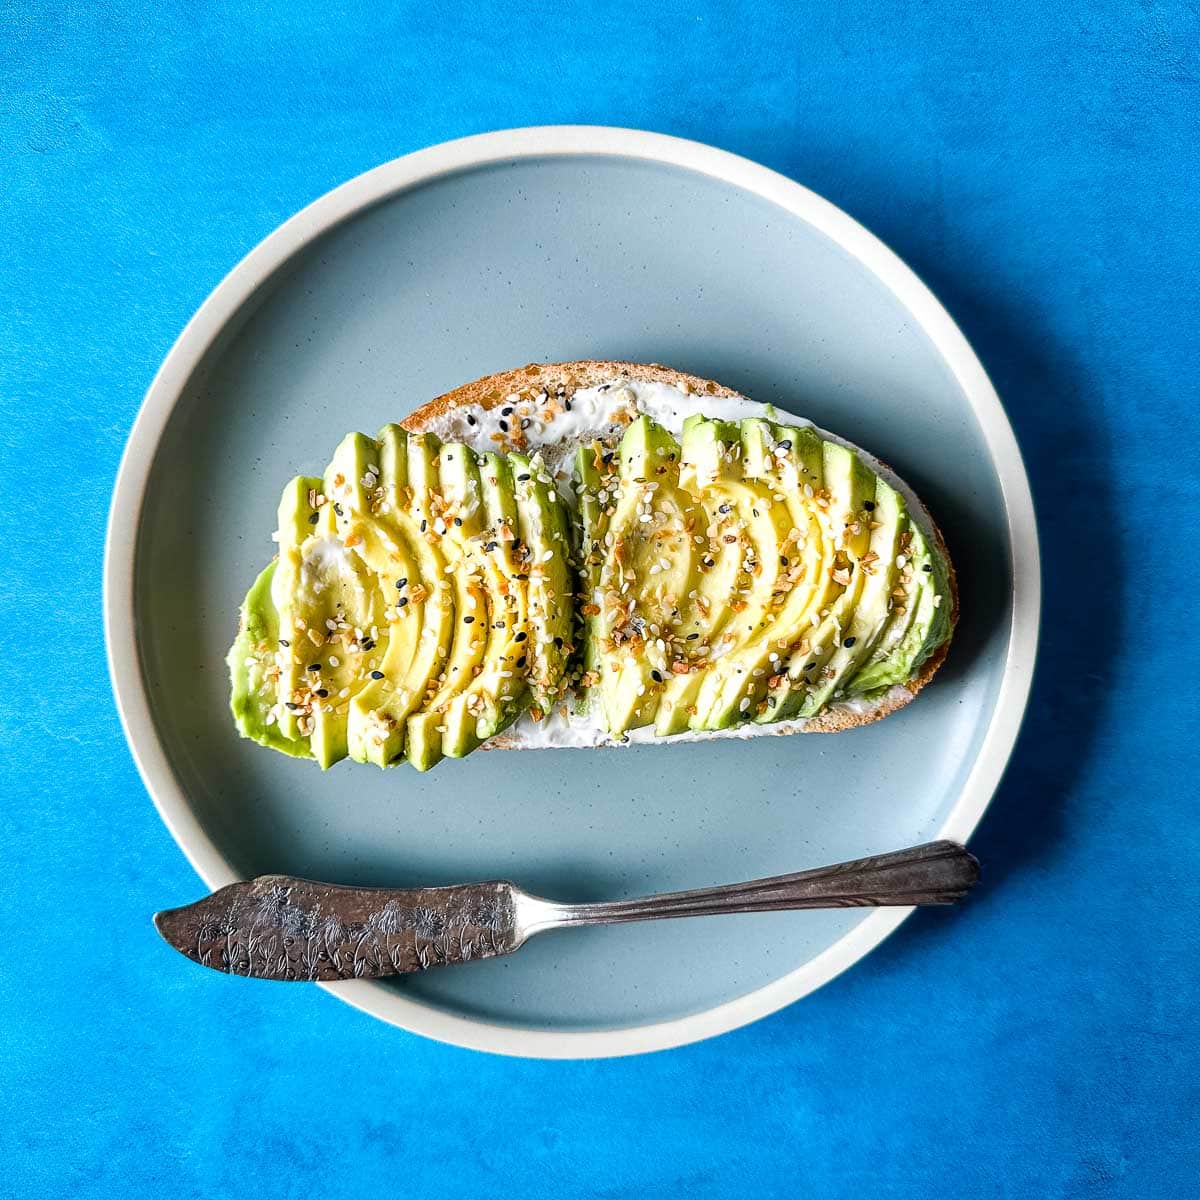 an avocado tartine sits on a light blue plate with a vintage silver knife over a blue darker background.